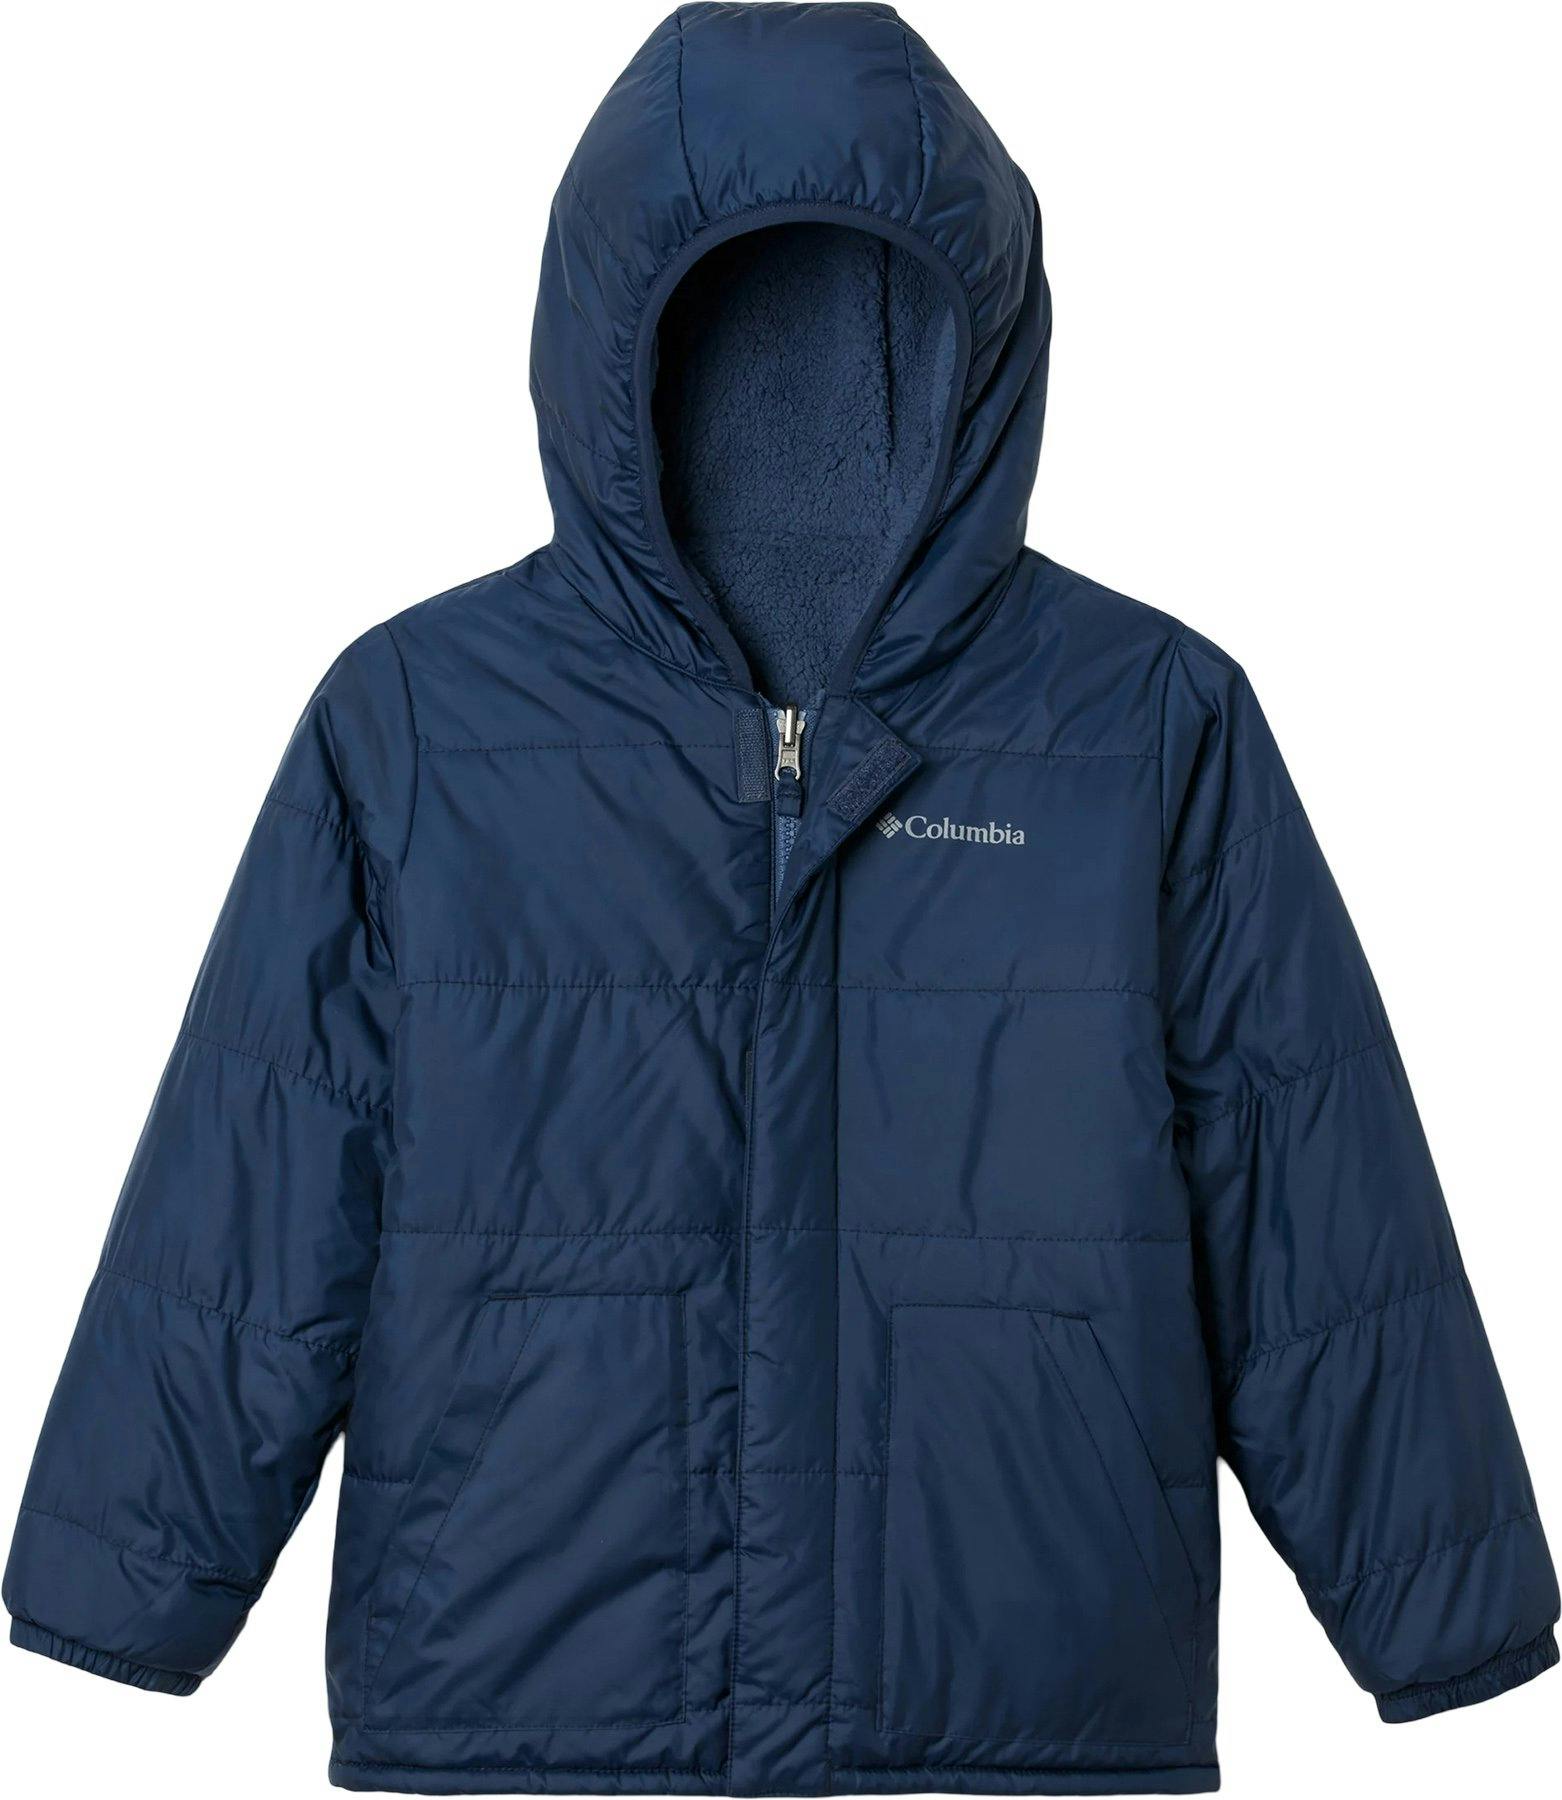 Product image for Big Fir Reversible Jacket - Boys